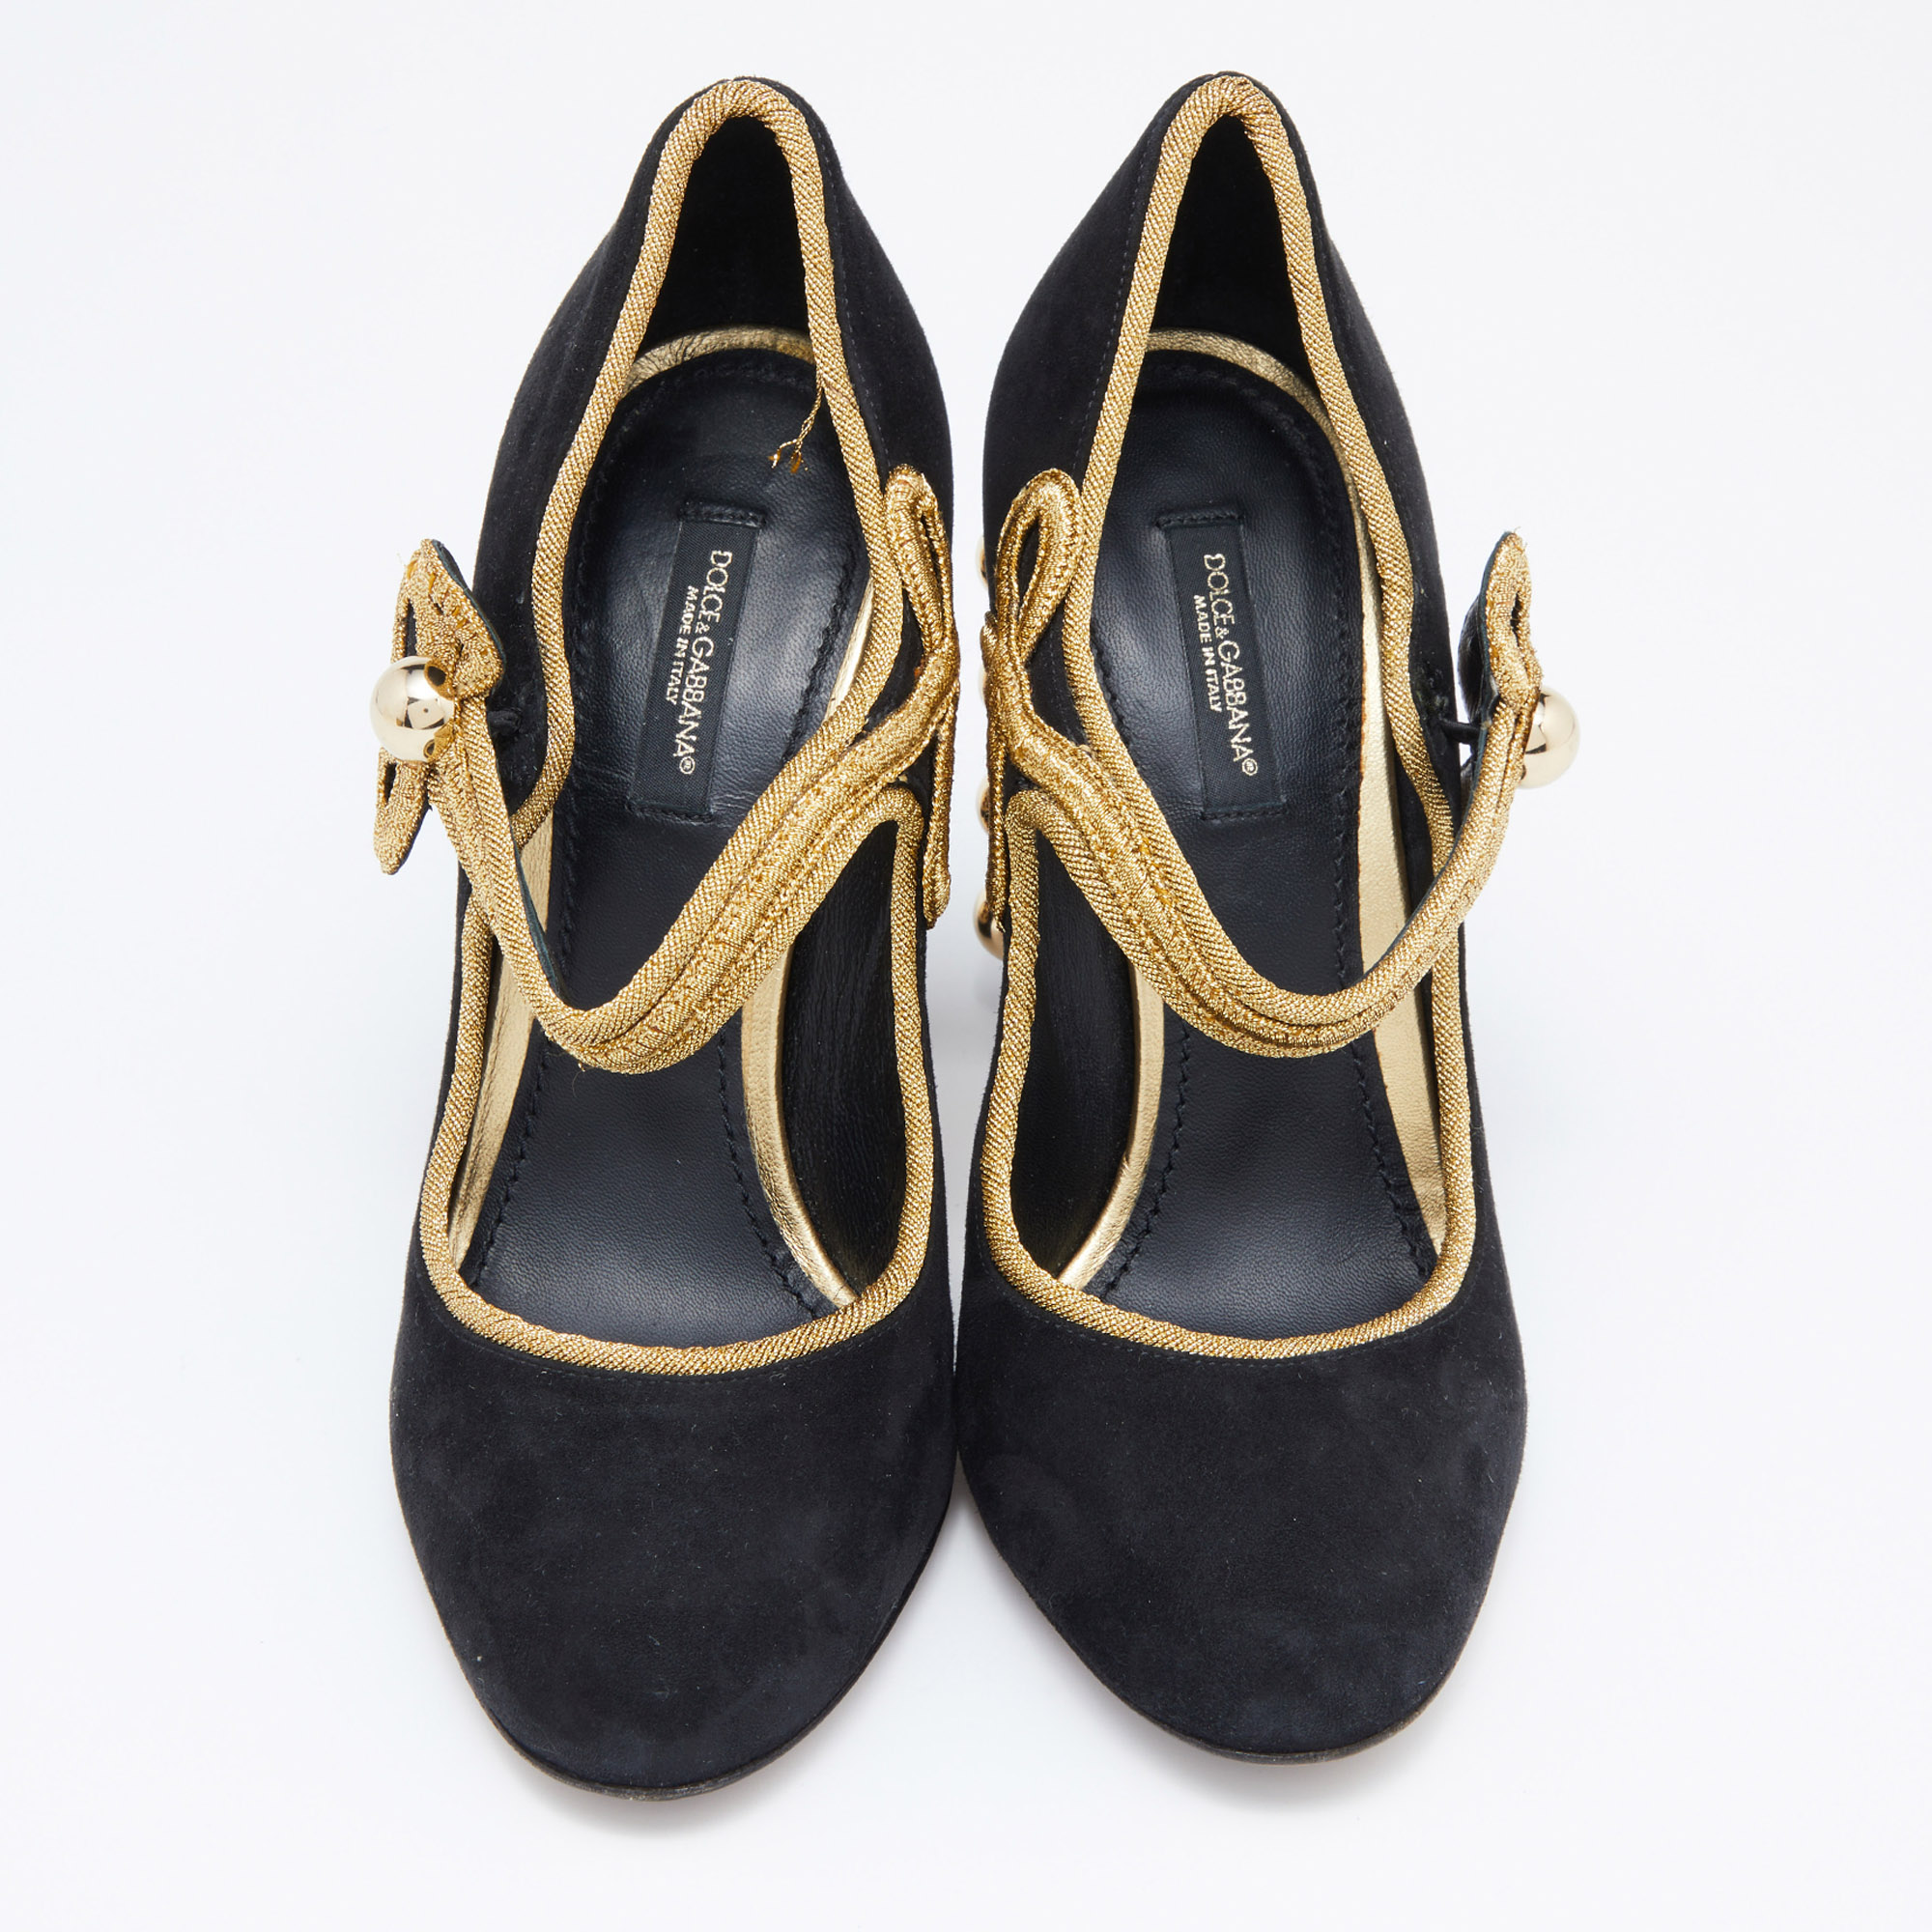 Dolce & Gabbana Black/Gold Suede Military Vally Pumps Size 37